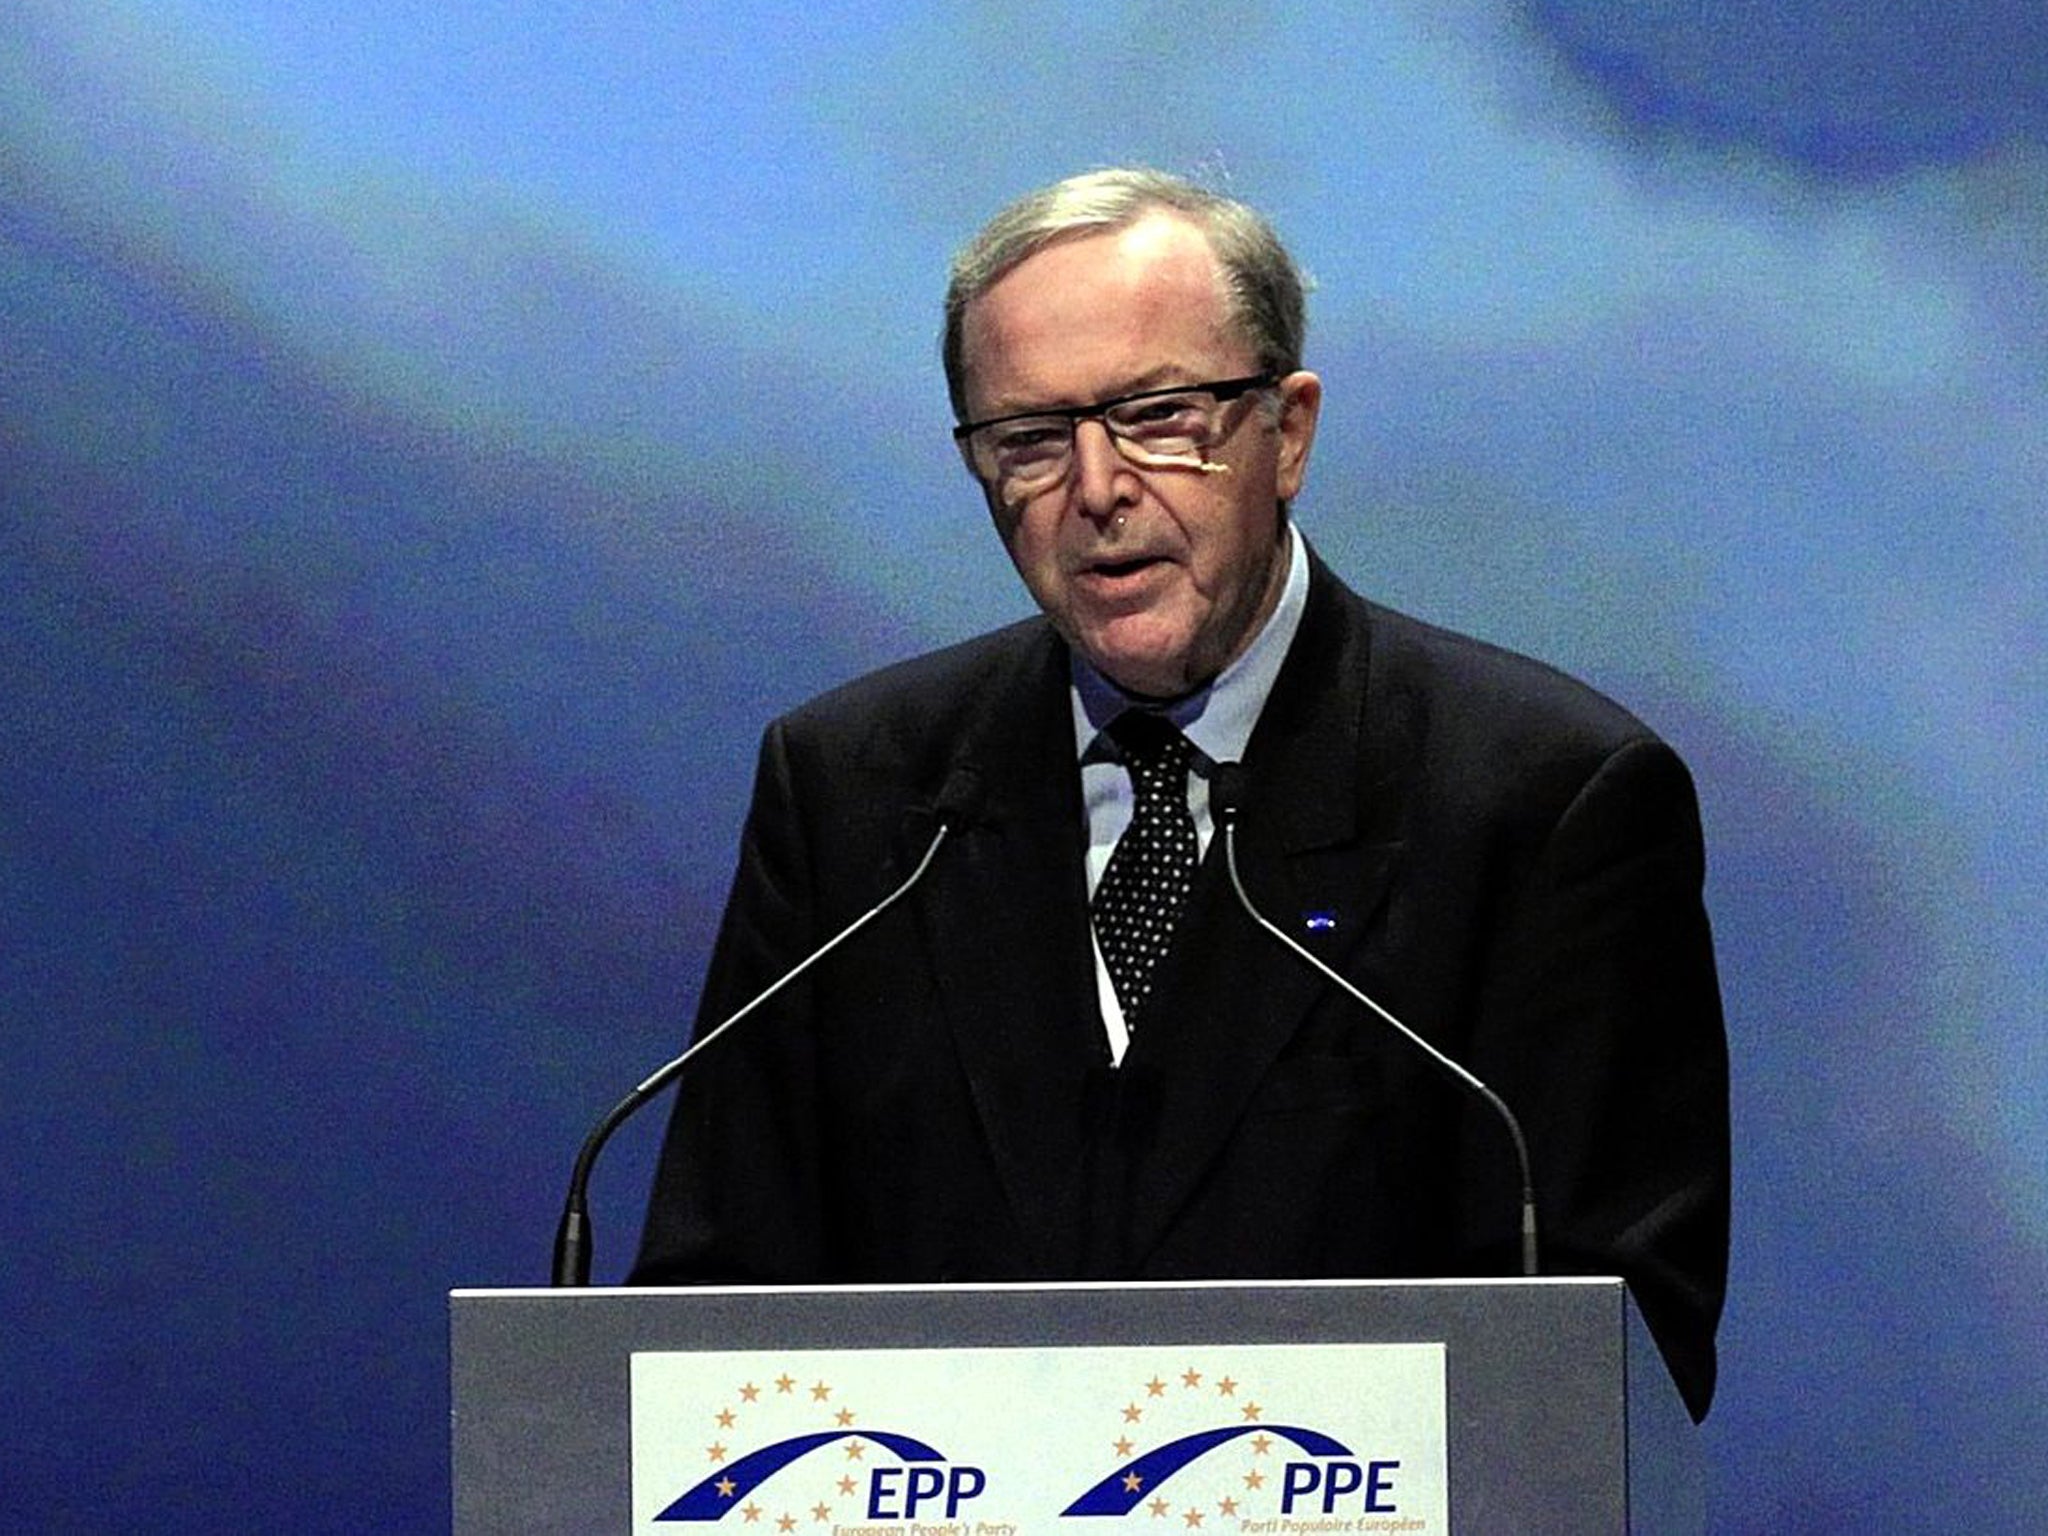 Martens: 'He made a lasting mark on Europe and beyond,' said the EPP president Joseph Daul